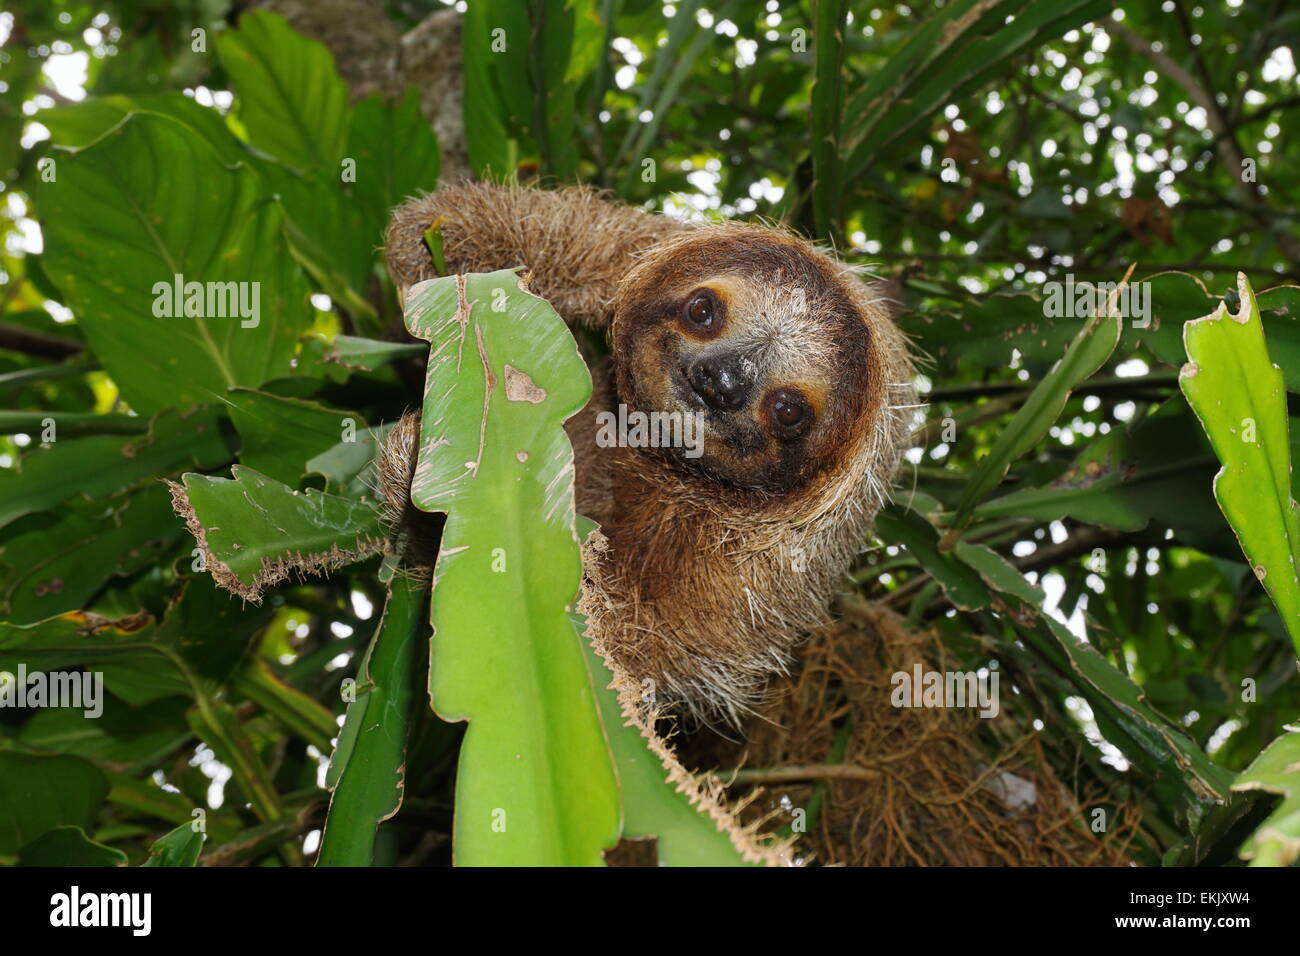 Three-toed sloth looking at camera in a tree, wild animal, Costa Rica, Central America Stock Photo